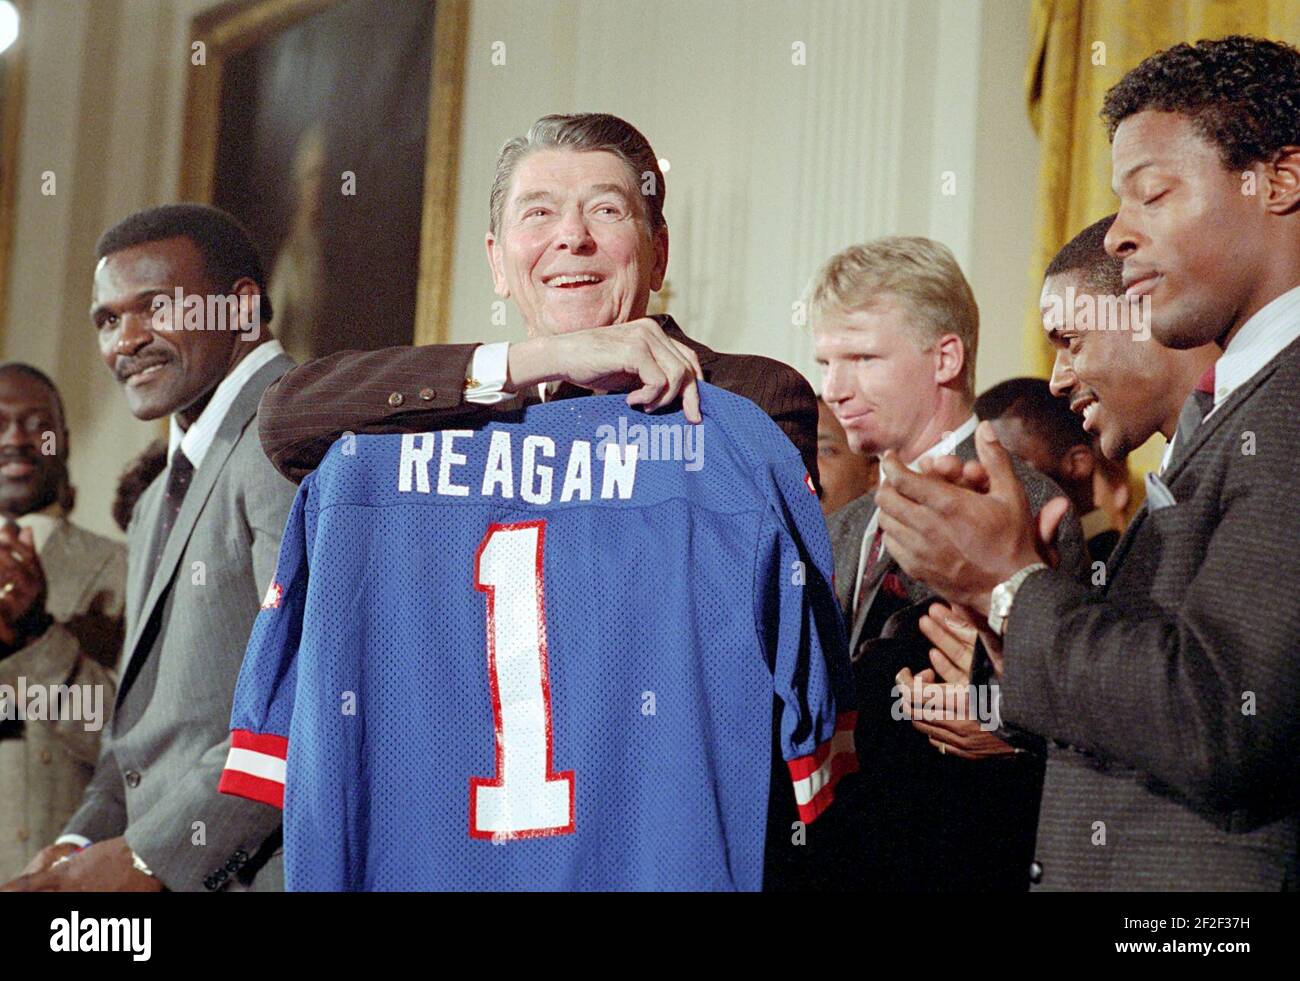 President Ronald Reagan receiving gift during a photo op with the New York Giants football team. Stock Photo